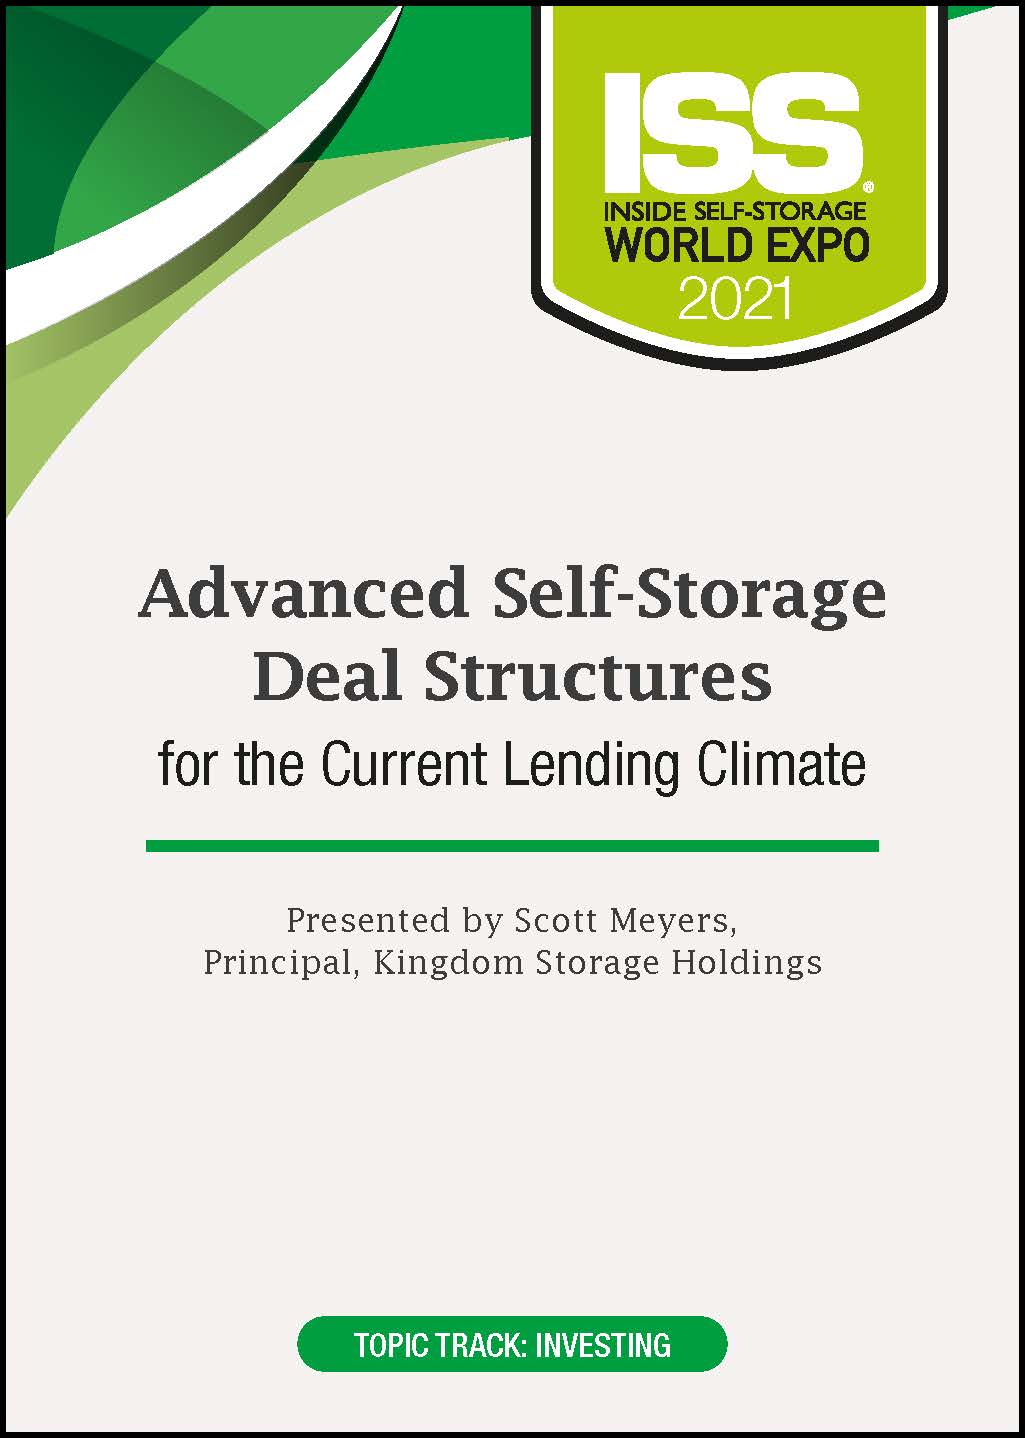 Advanced Self-Storage Deal Structures for the Current Lending Climate